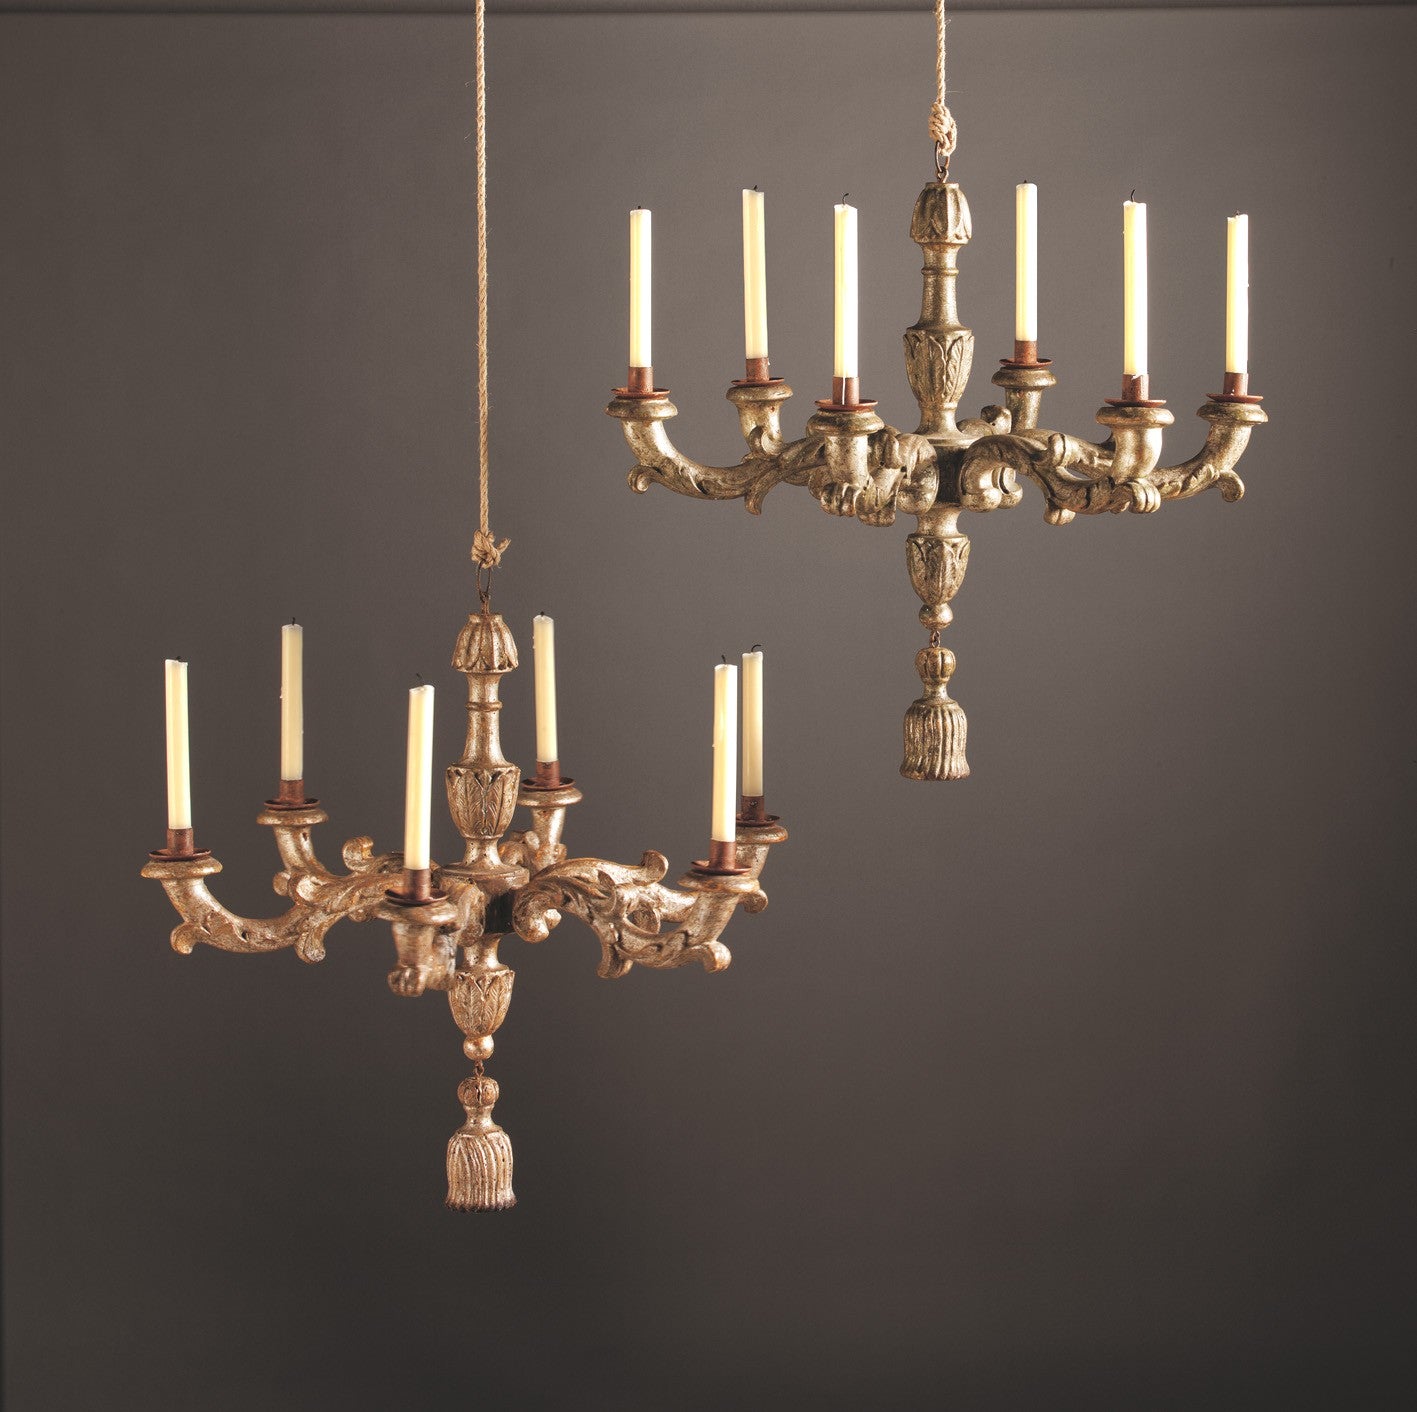 Two Six-Branch Rococo Chandeliers